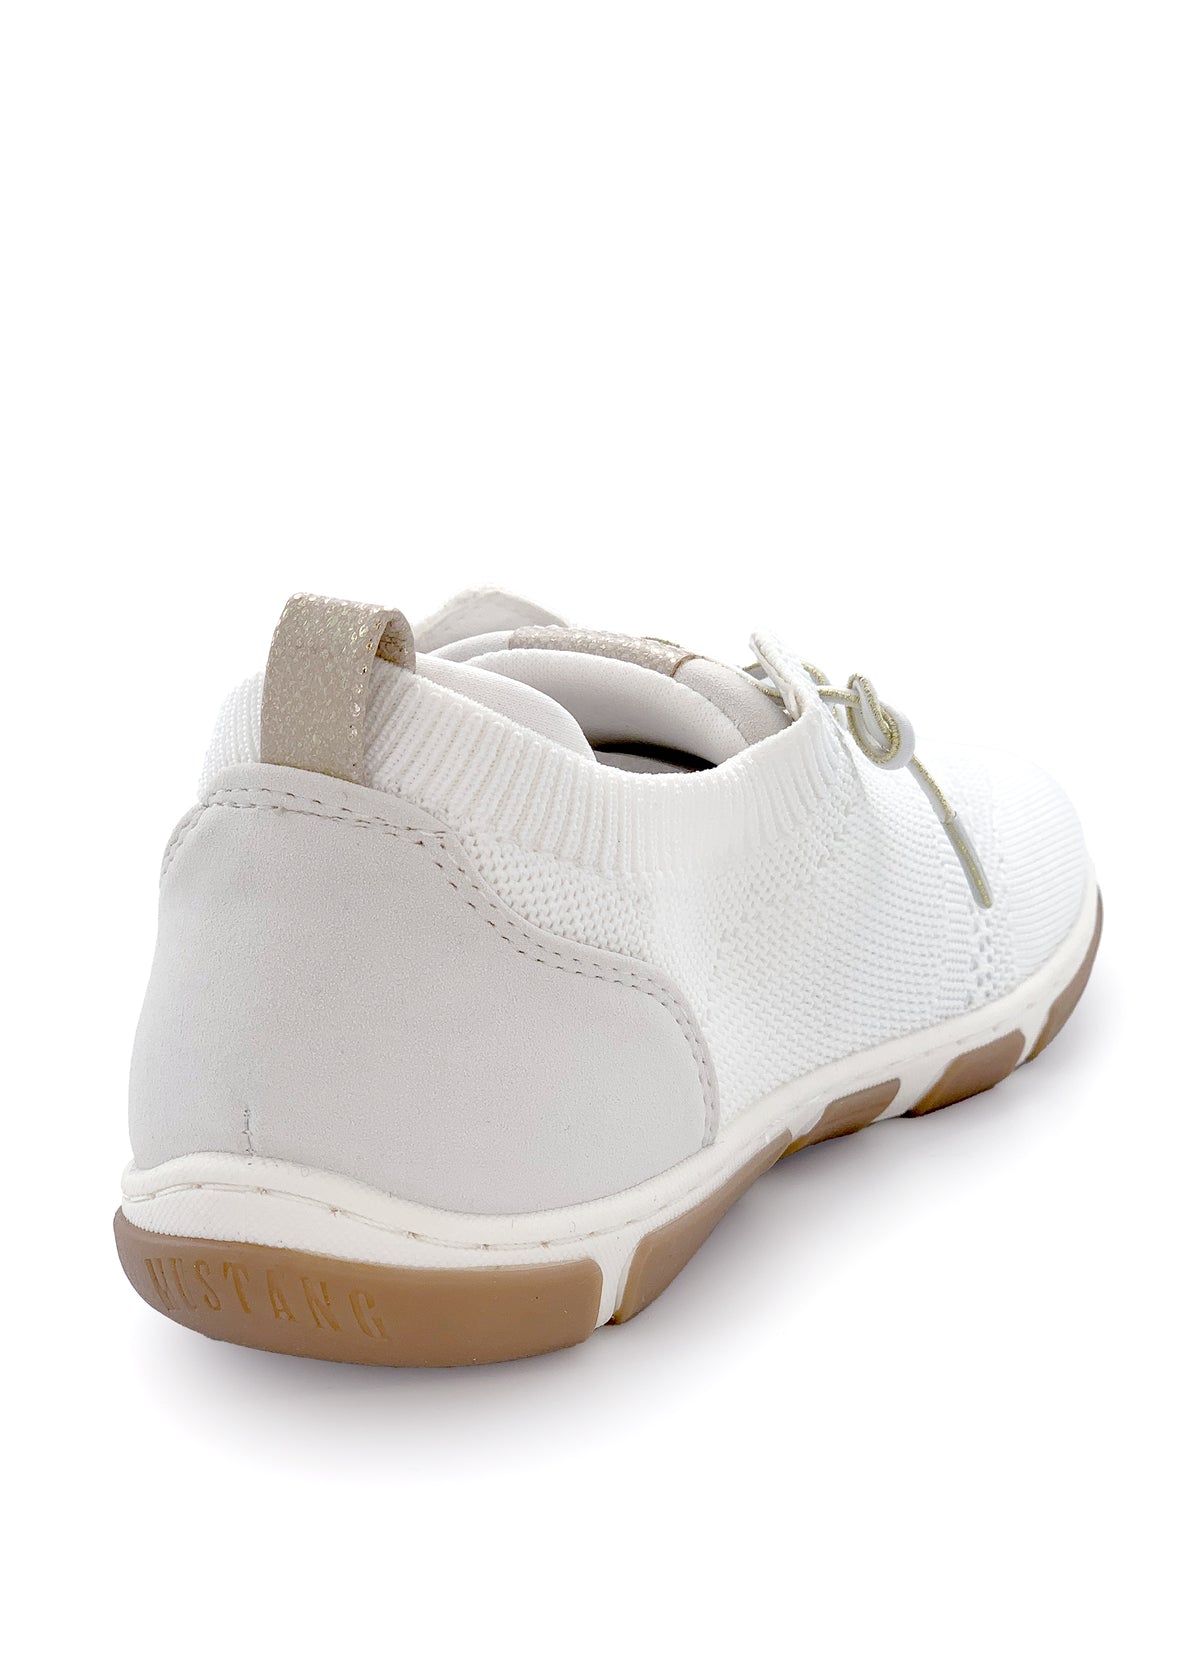 Sneakers with elastic bands - white textile